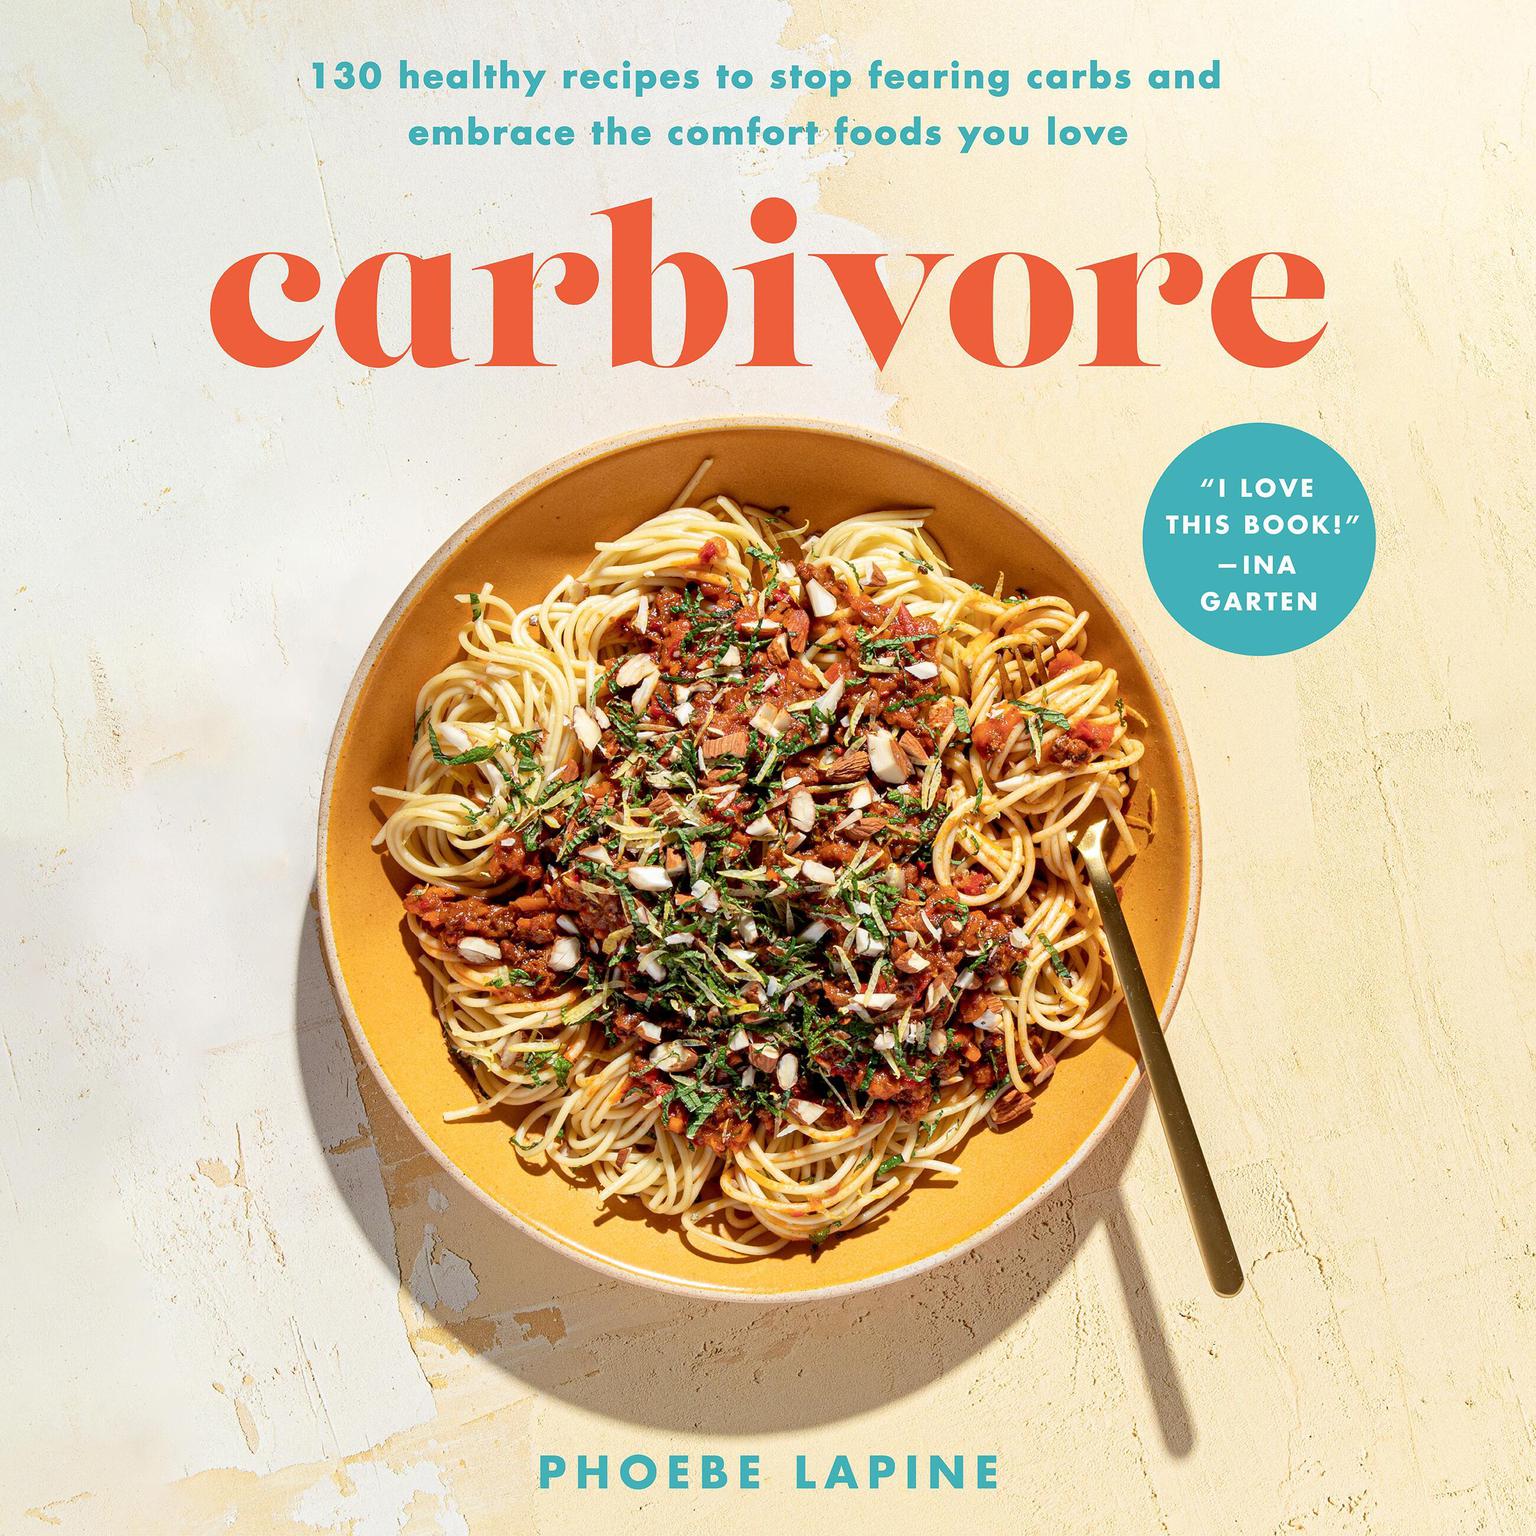 Carbivore: 130 Healthy Recipes to Stop Fearing Carbs and Embrace the Comfort Foods You Love Audiobook, by Phoebe Lapine